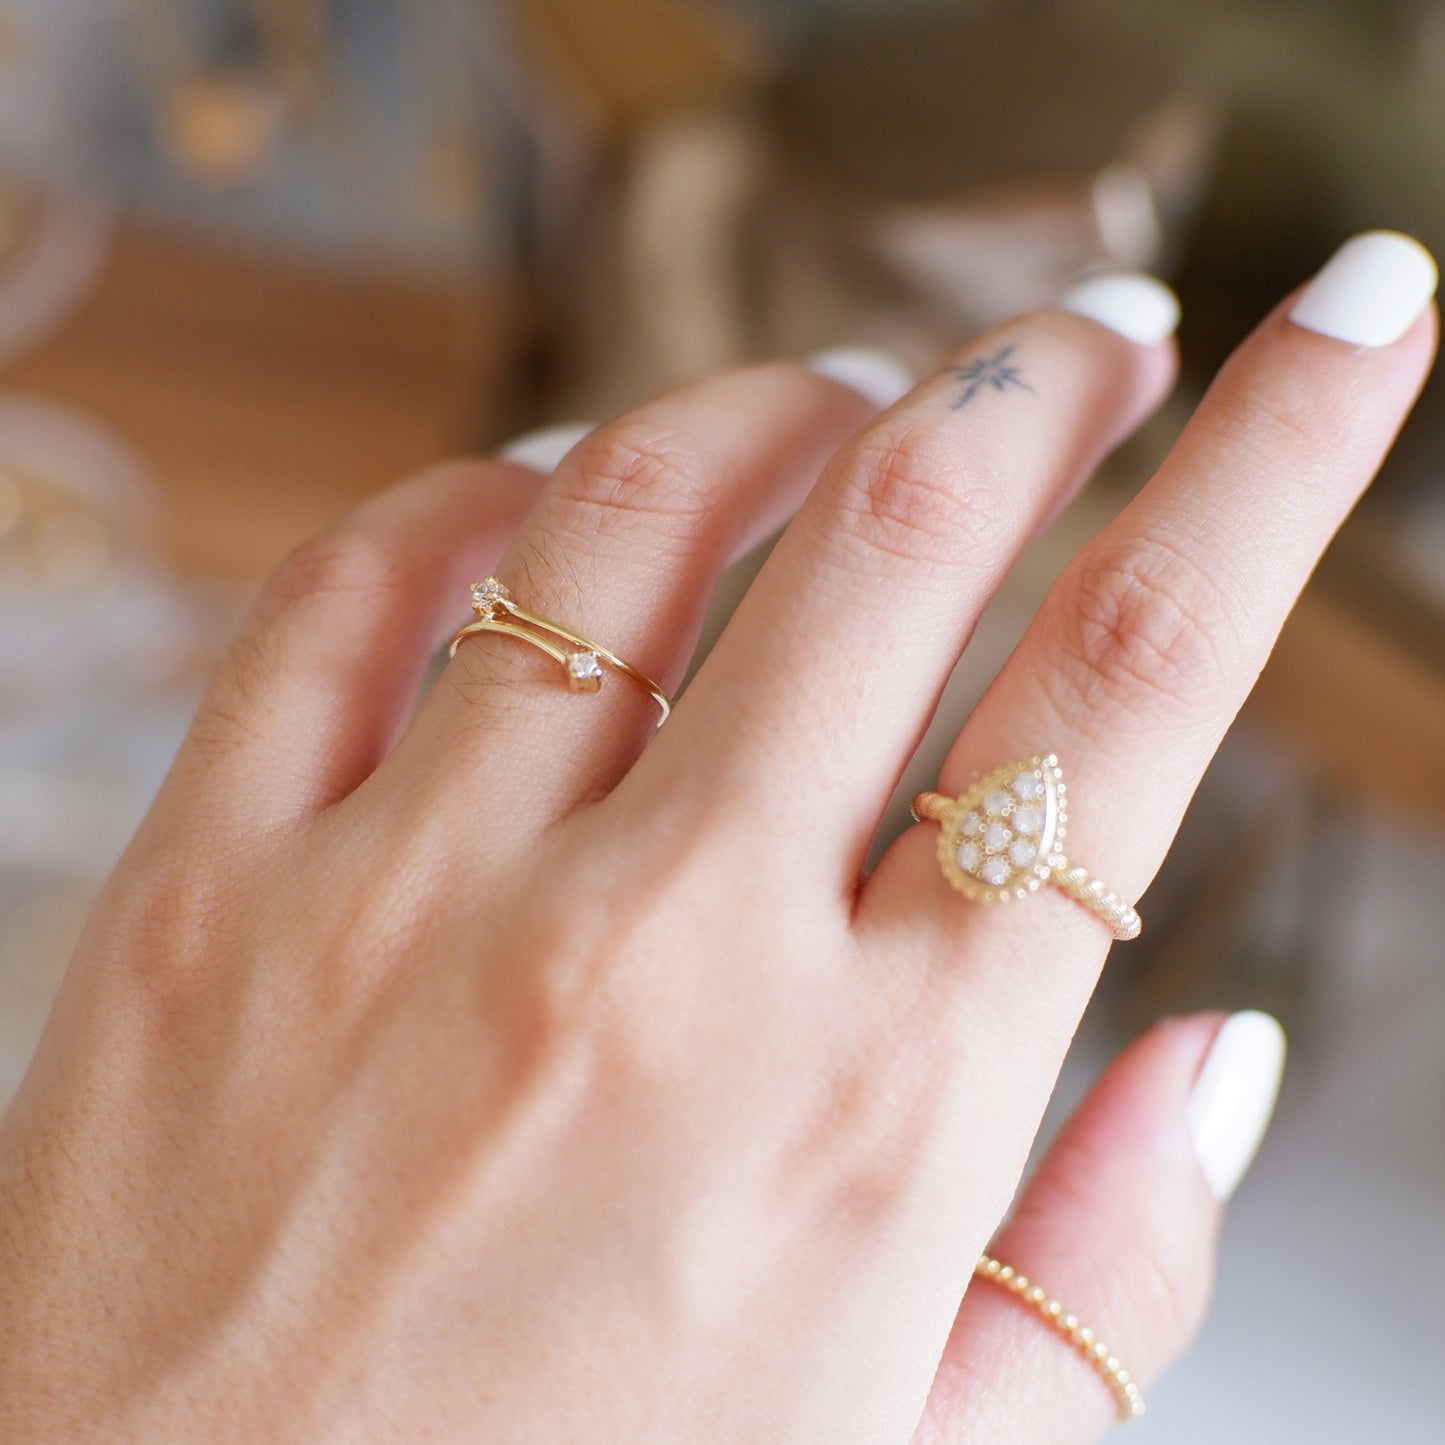 The Bloom Diamond Ring in Solid Gold